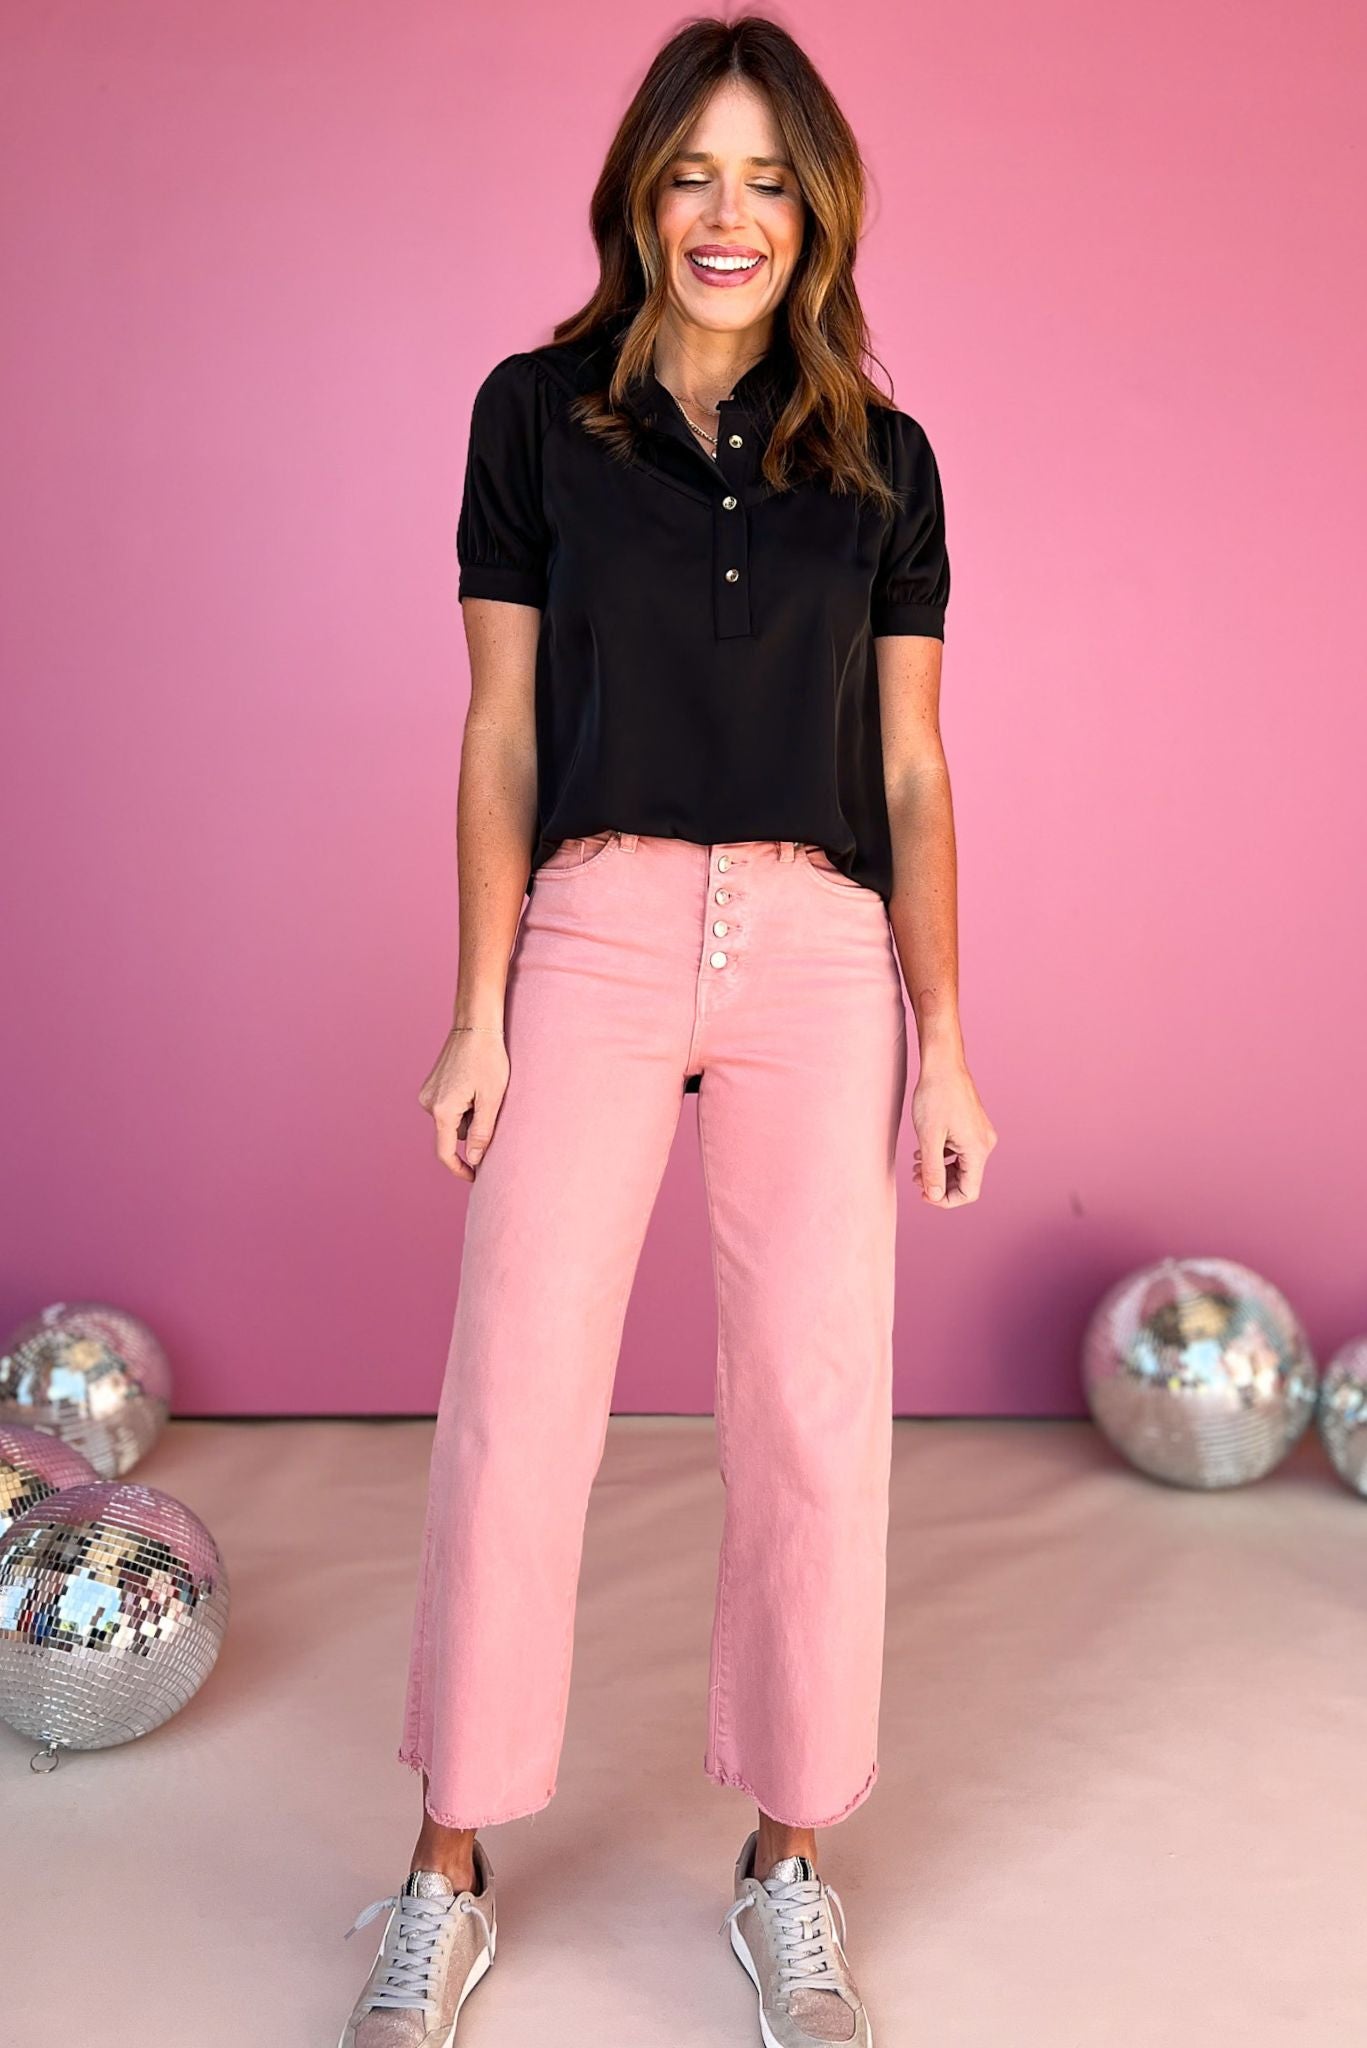 SSYS The Marley Button Puff Sleeve Top In Black, ssys the lablel, ssys top, elevated top, work top, office top, spring fashion, spring top, button down top, must have top, mom style, shop style your senses by mallory fitzsimmons, ssys by mallory fitzsimmons